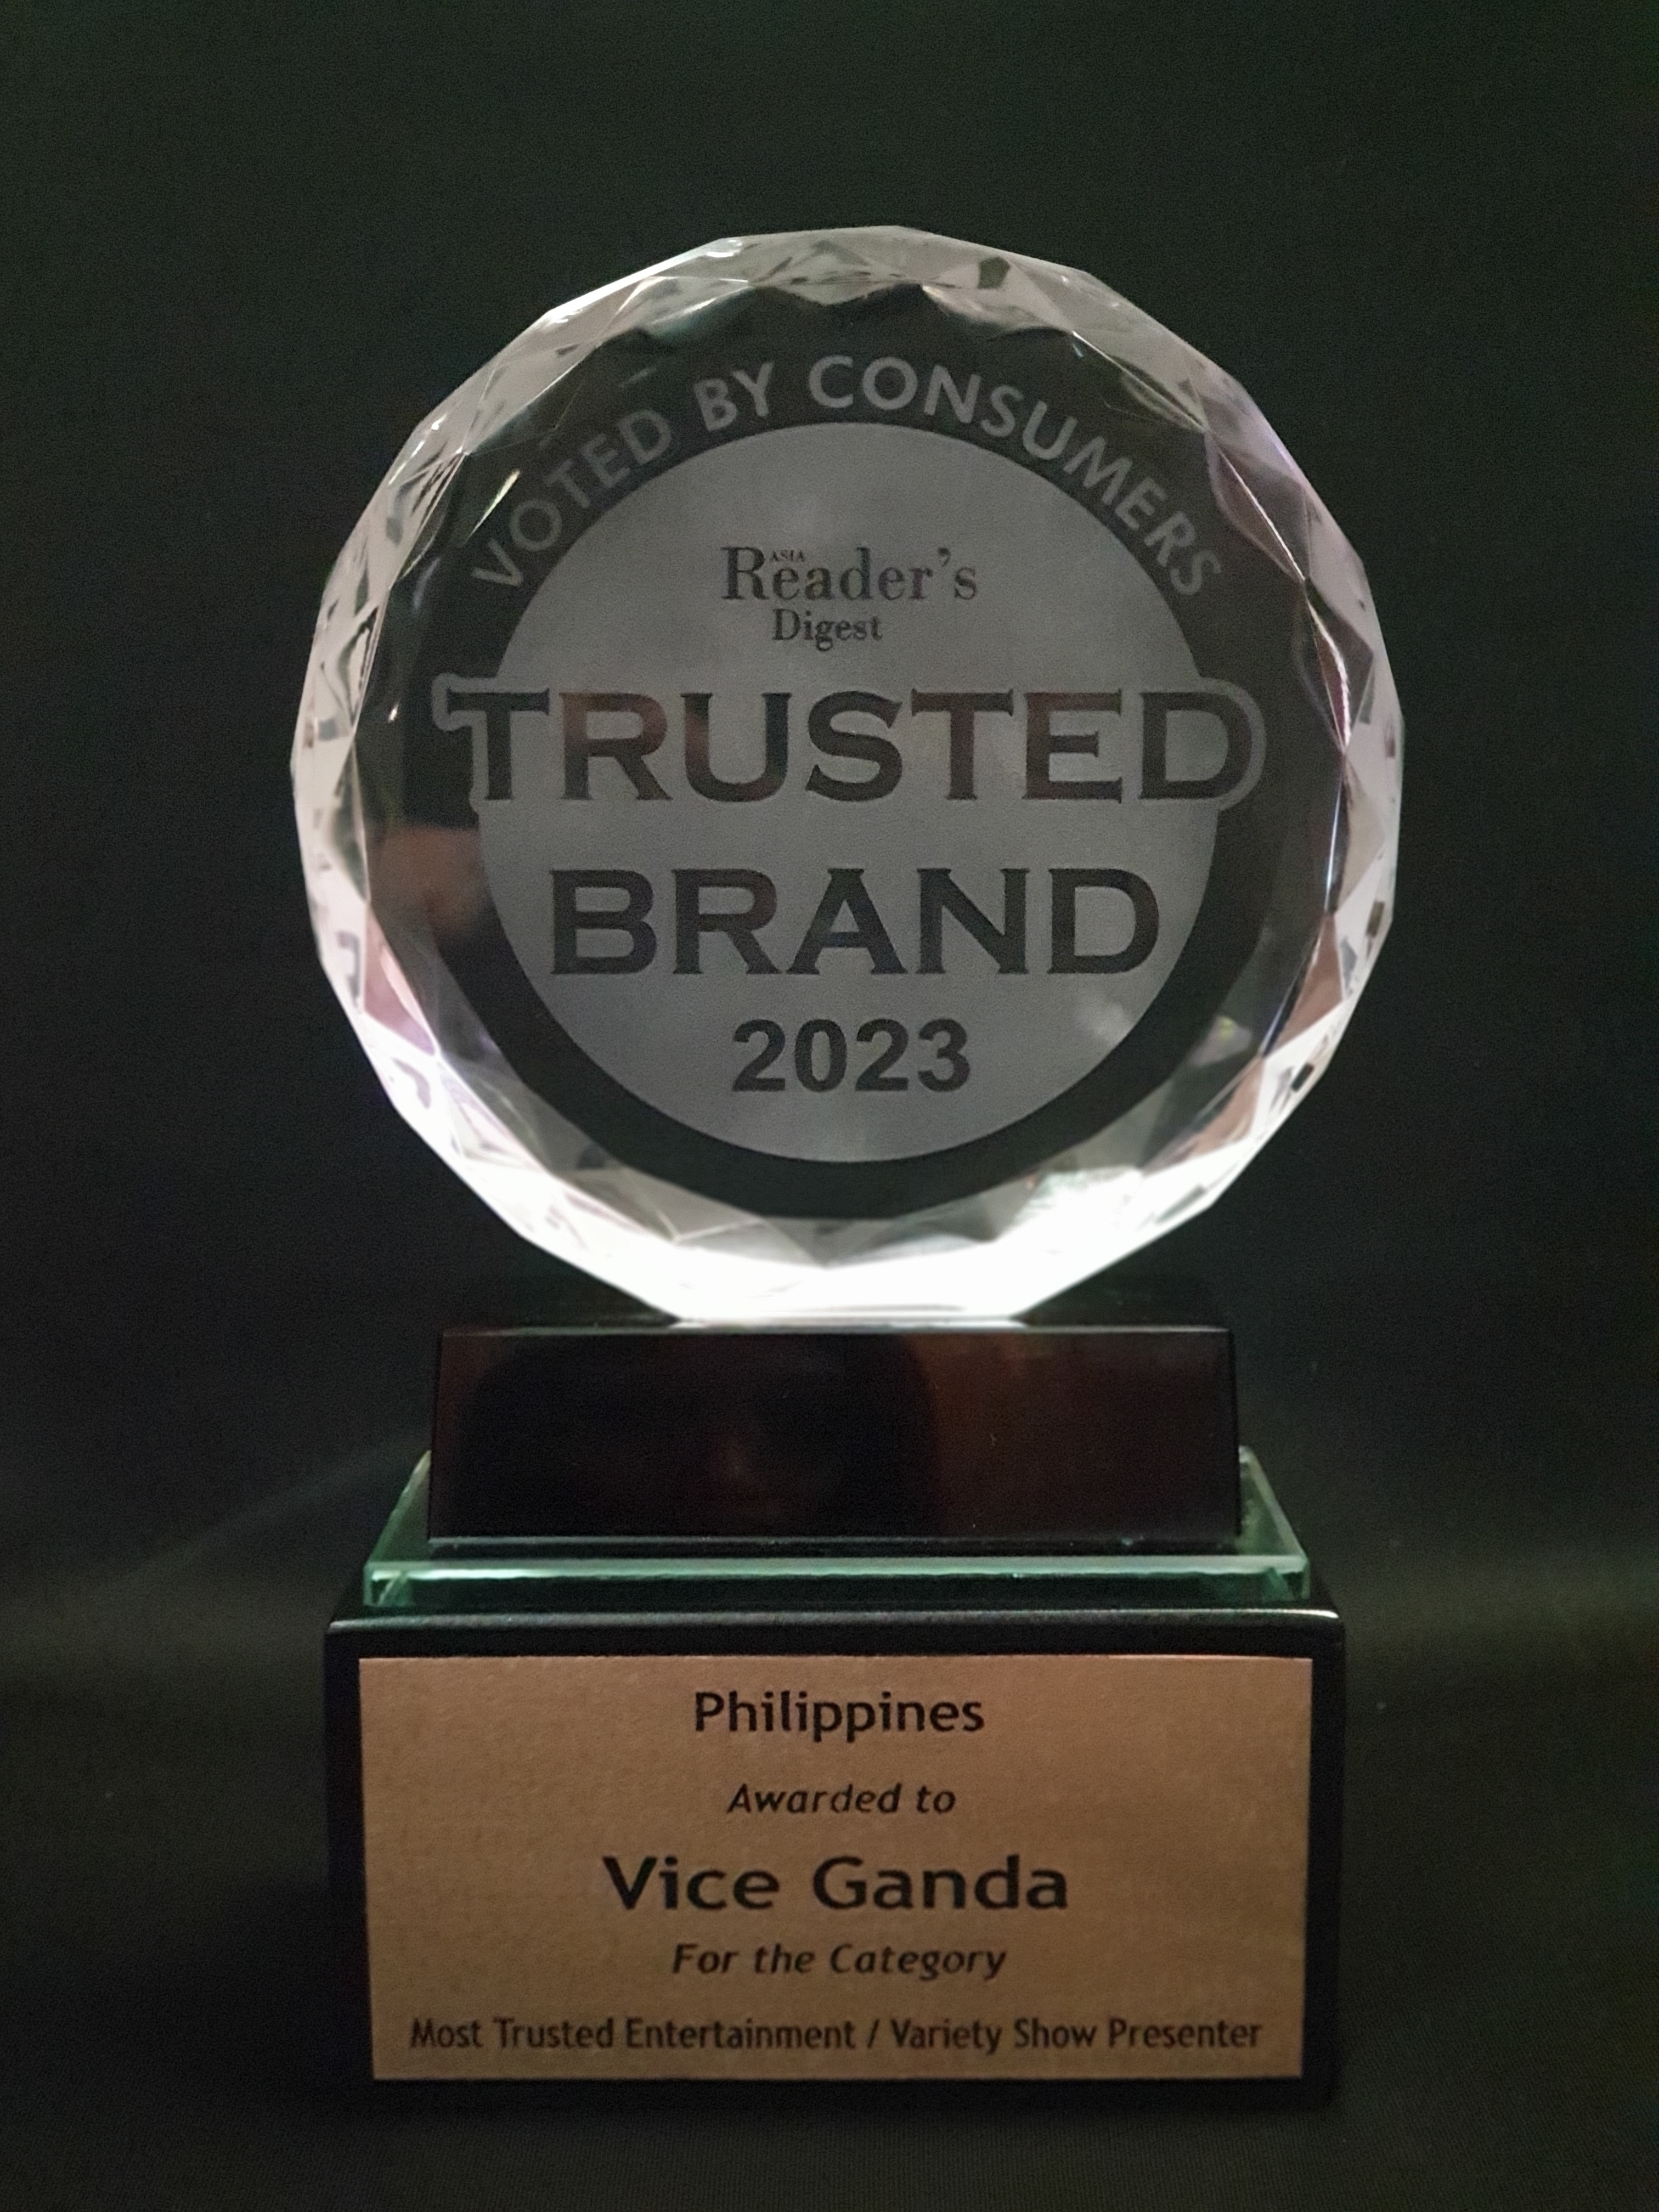 Vice Ganda named as Most Trusted Entertainment Show Presenter